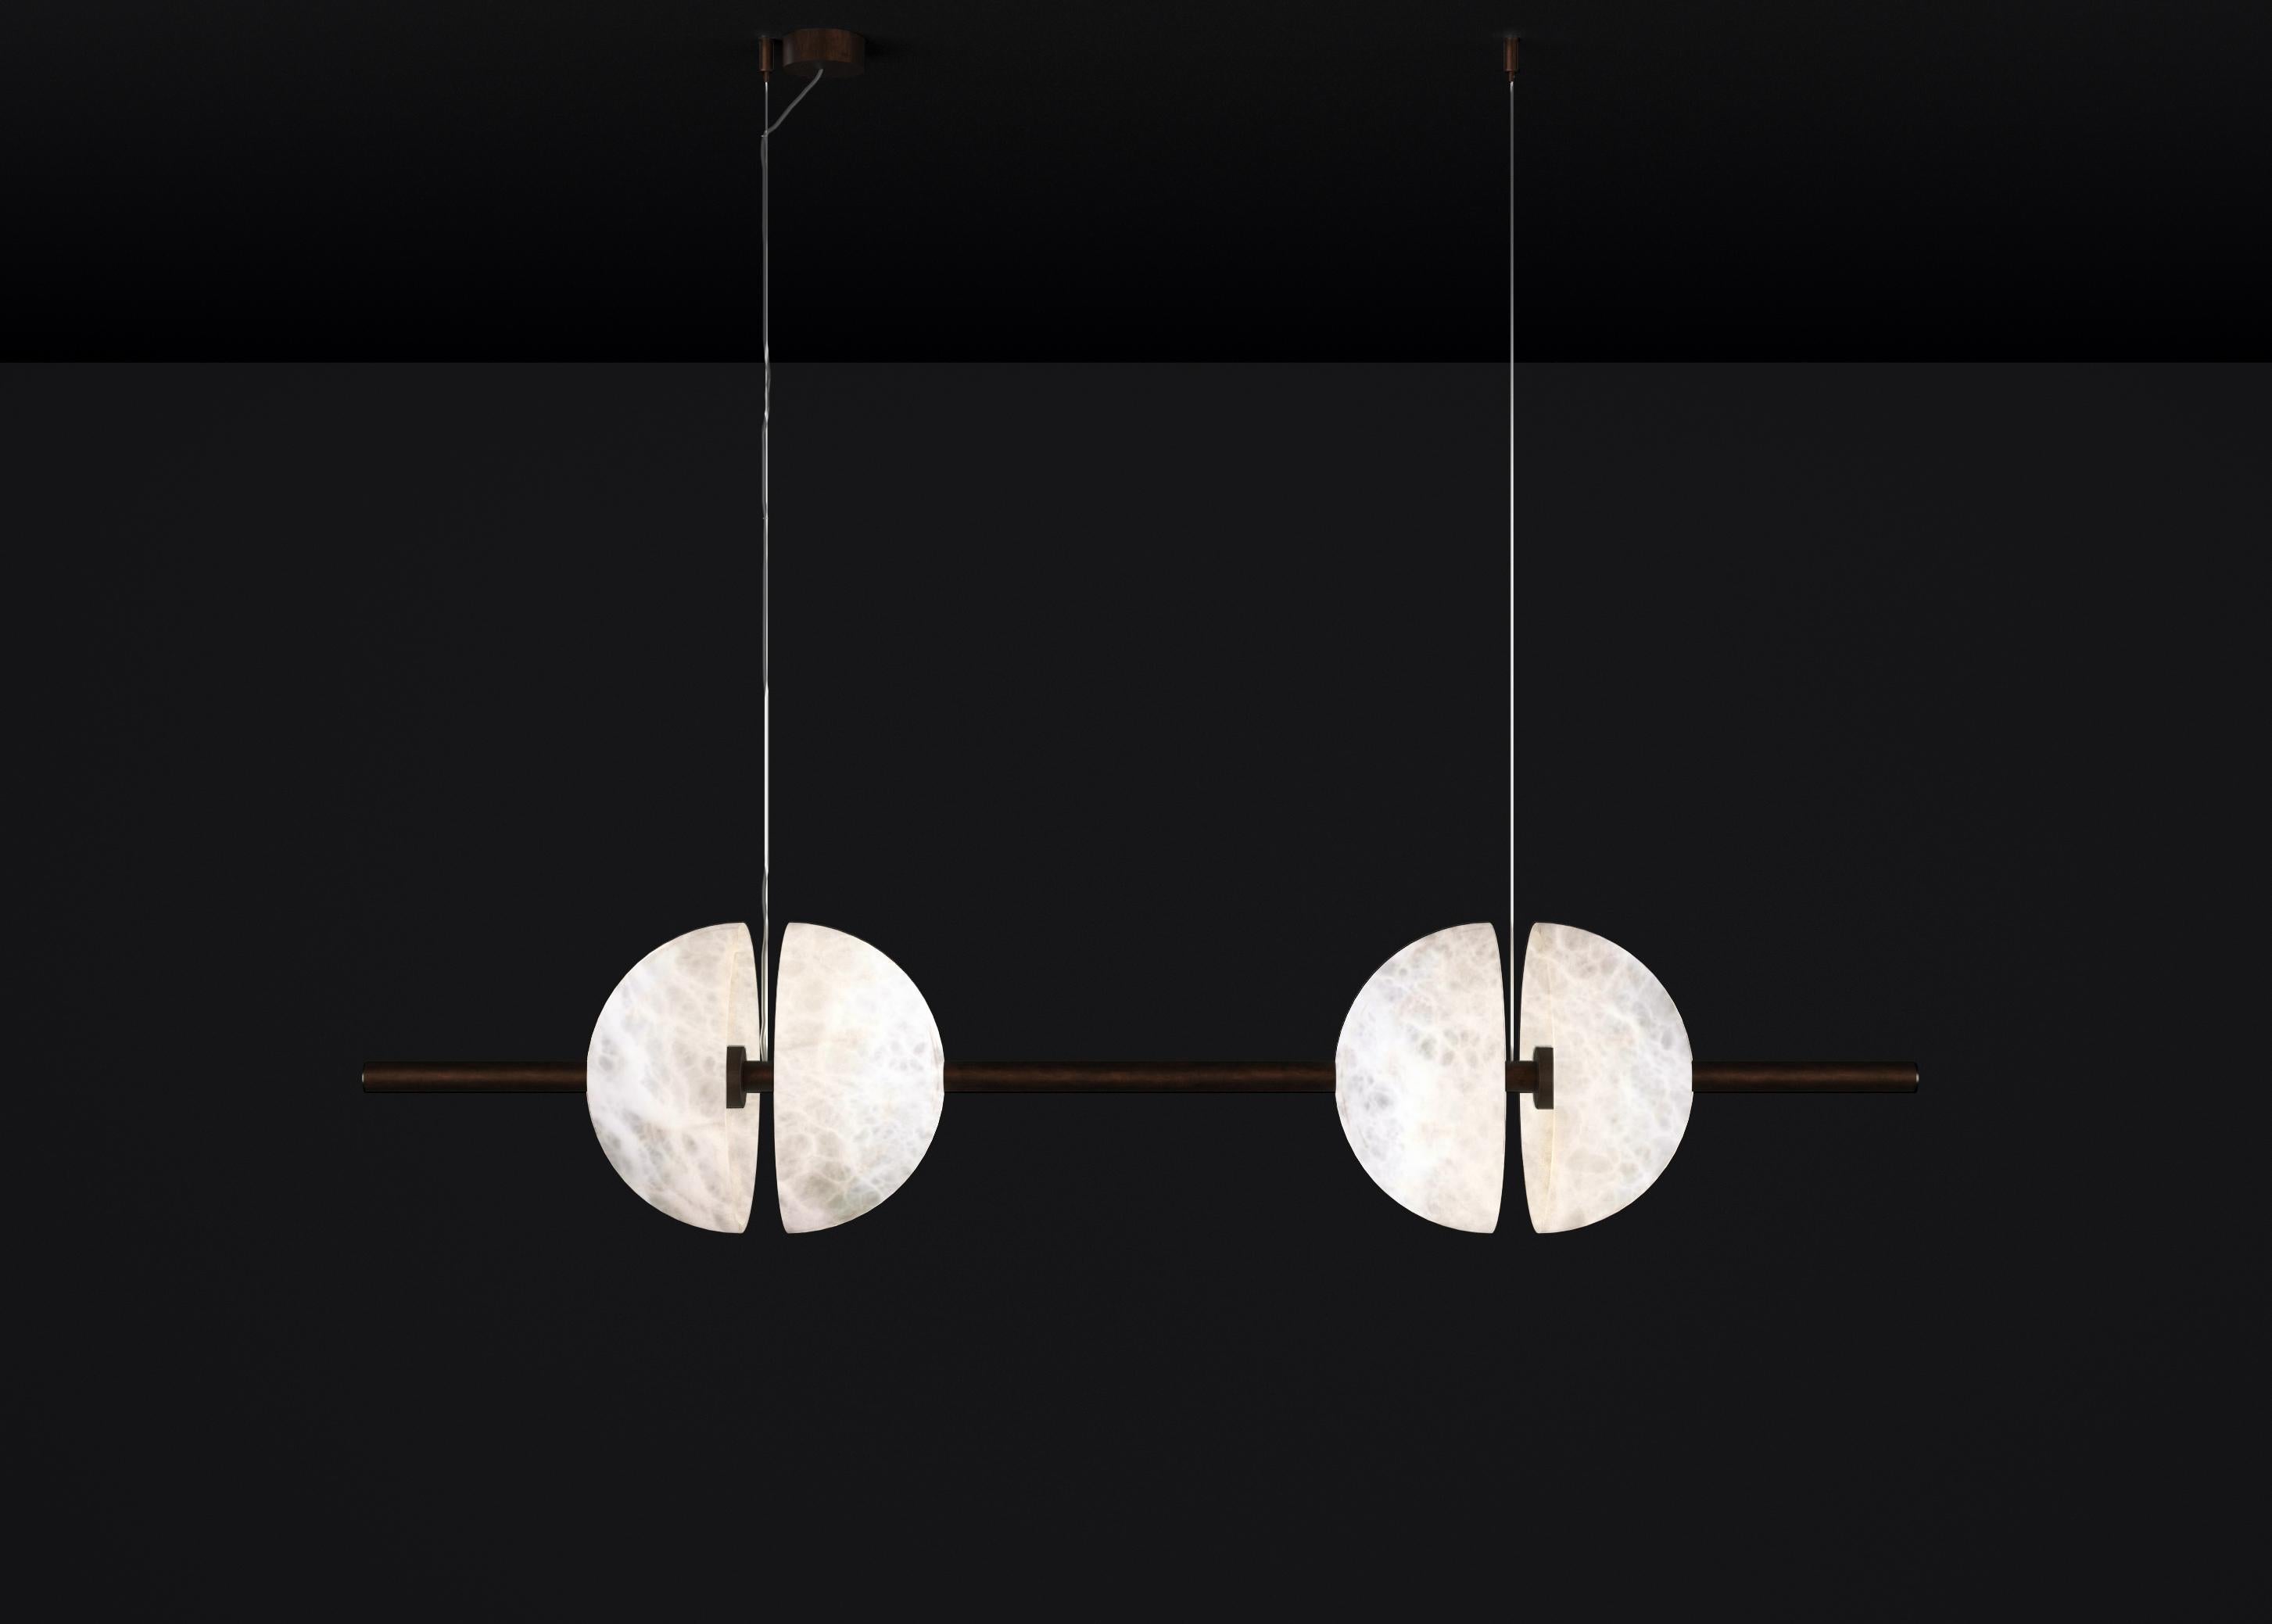 Ermes Ruggine Of Florence And Alabaster Pendant Light 1 by Alabastro Italiano
Dimensions: D 30 x W 150 x H 300 cm.
Materials: White alabaster and ruggine of Florence metal.

Available in different finishes: Shiny Silver, Bronze, Brushed Brass,